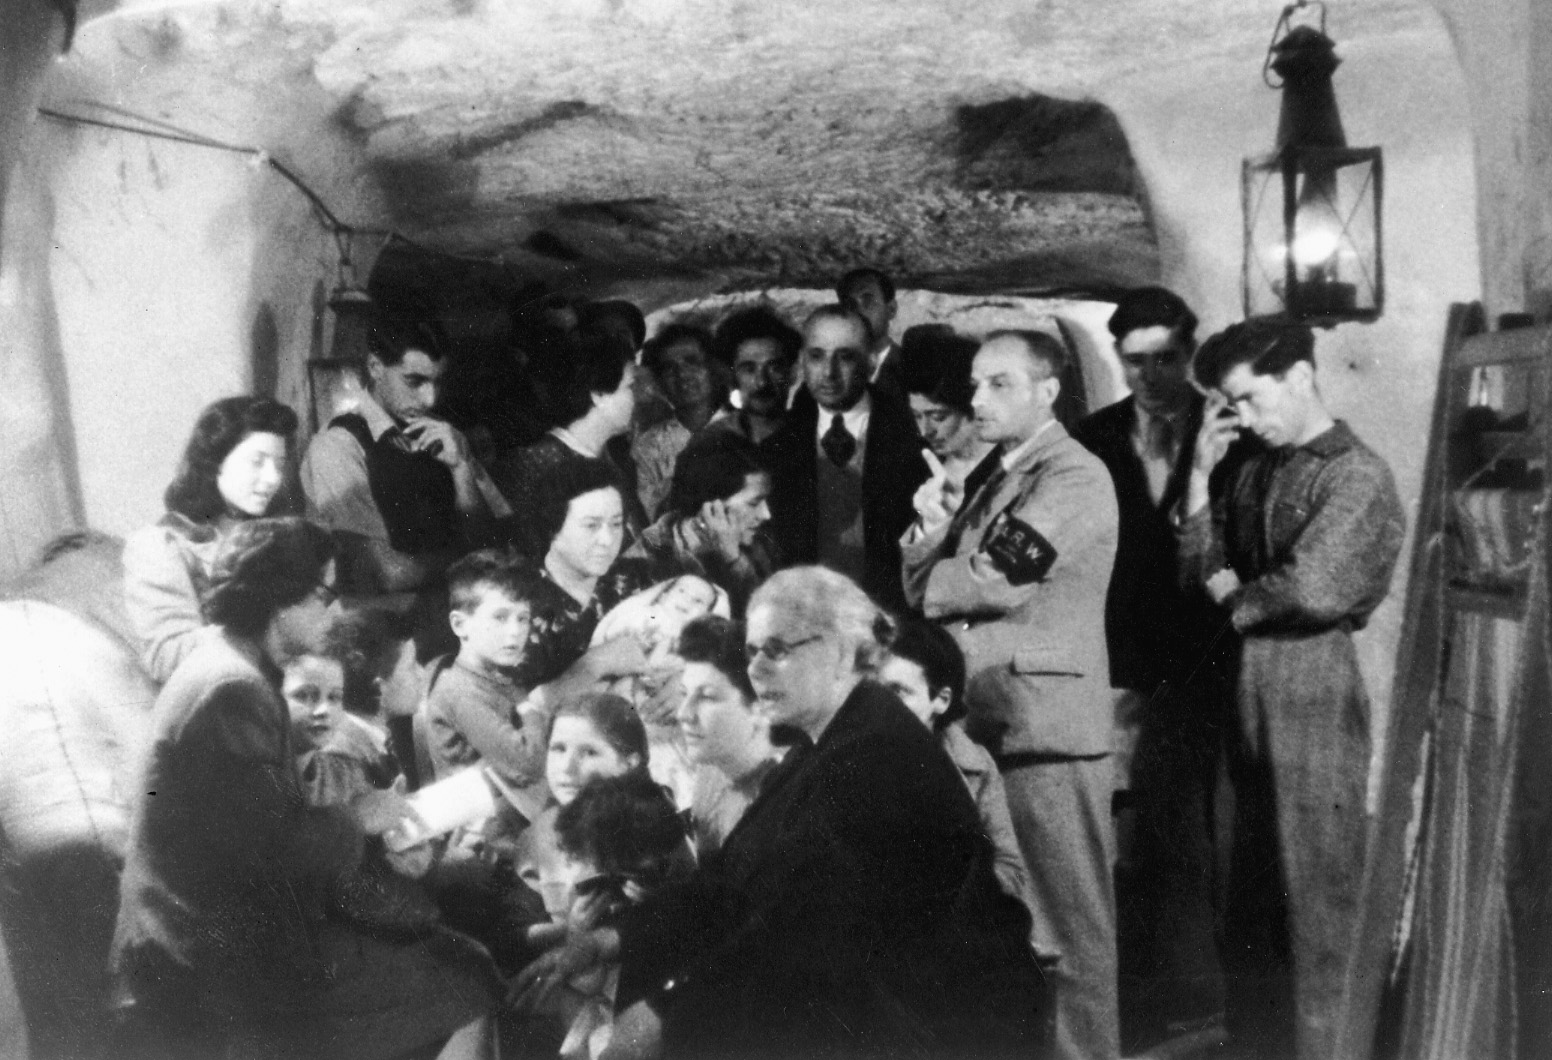 Maltese civilians huddle in the safety of an underground tunnel during one of the many air raids conducted by the Luftwaffe.